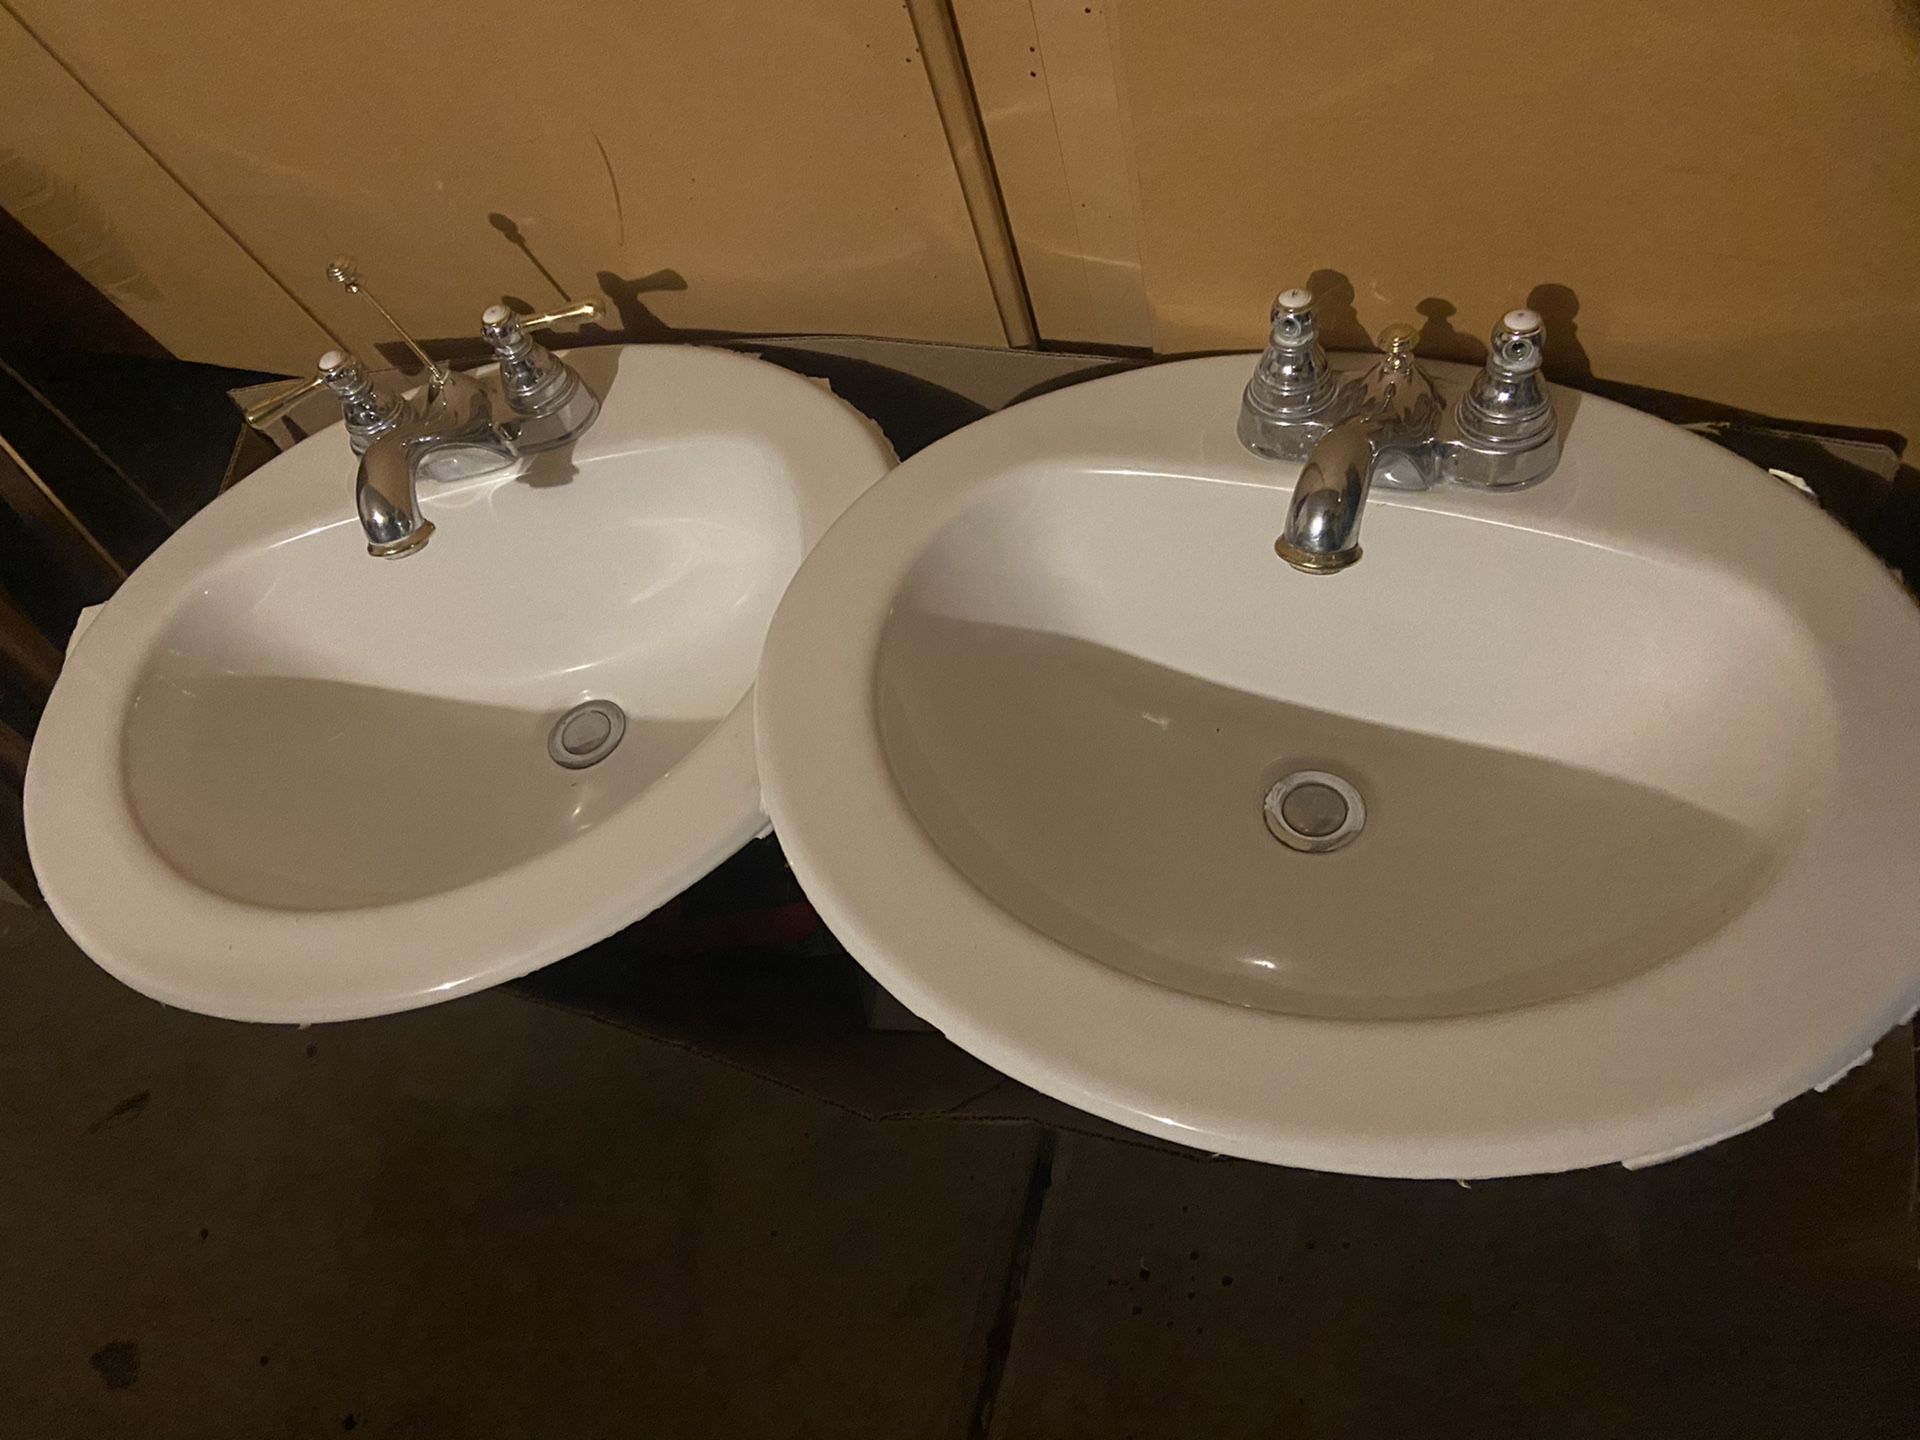 2 sink and faucet sets.